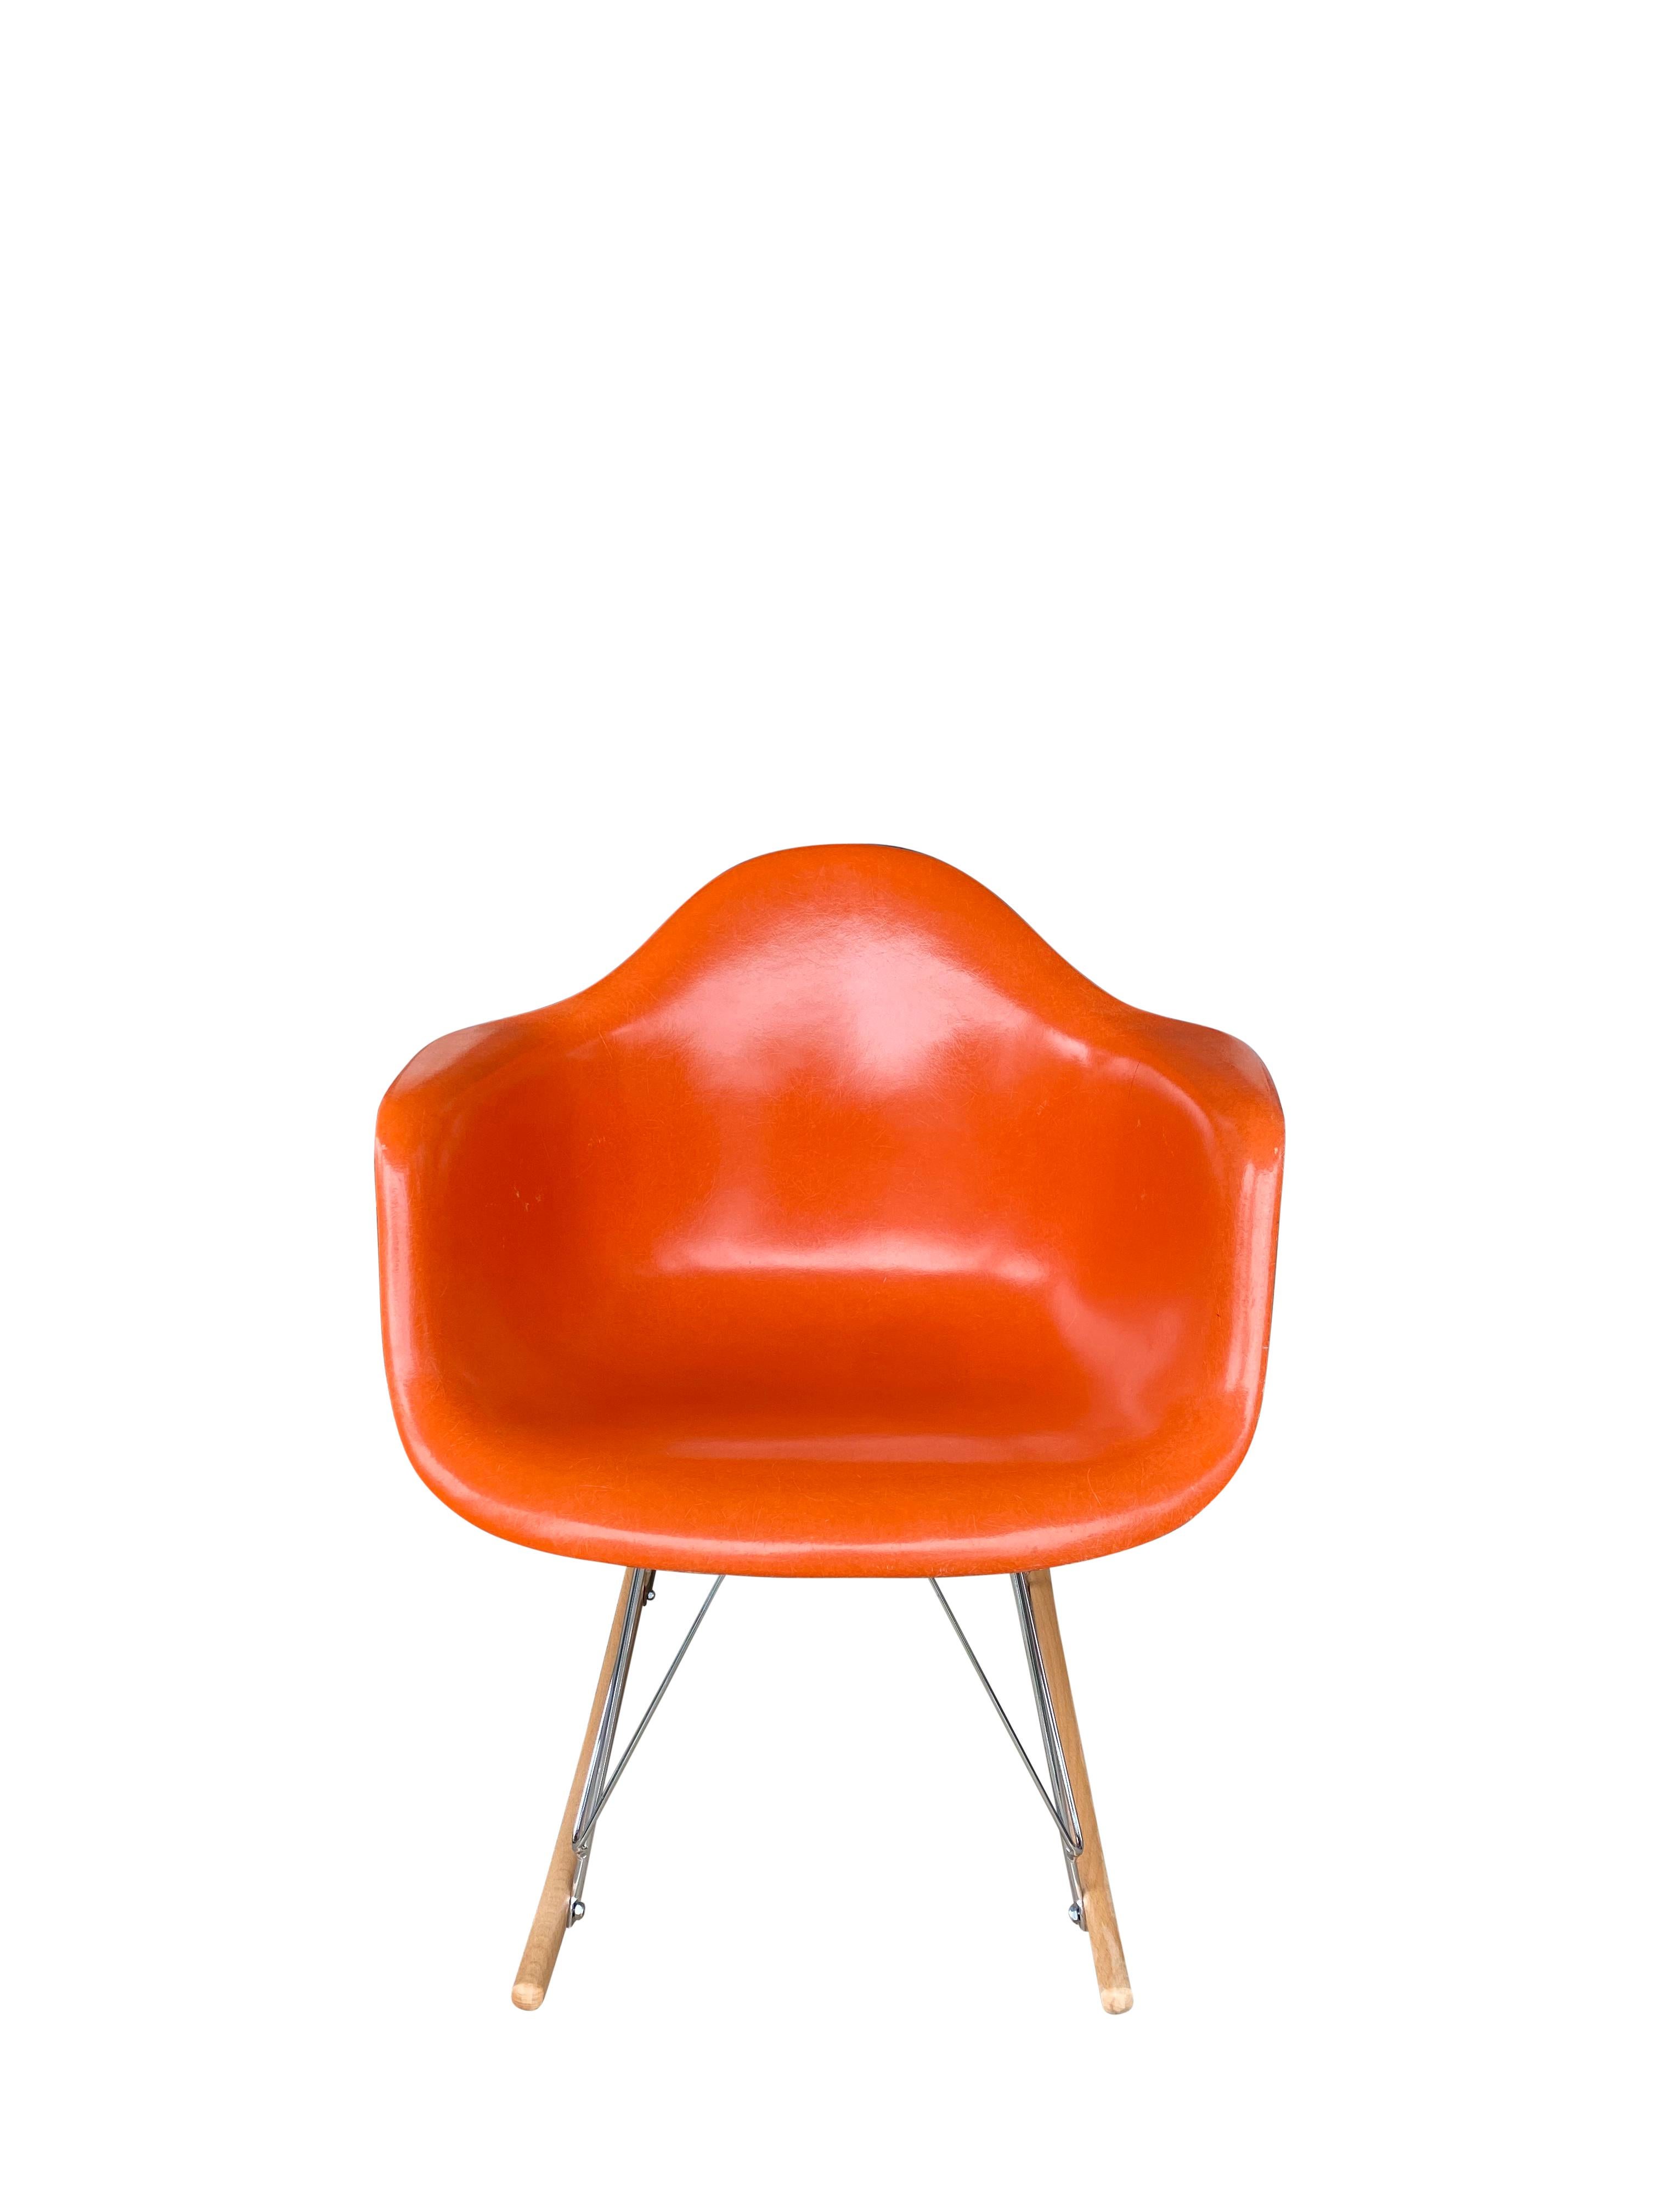 Gorgeous edition of the design classics model RAR rocking chair by Charles and Ray Eames and manufactured by Herman Miller. Clean shell with gorgeous and vibrant red orange hue and no cracks or holes. Signed Herman Miller and guaranteed authentic.